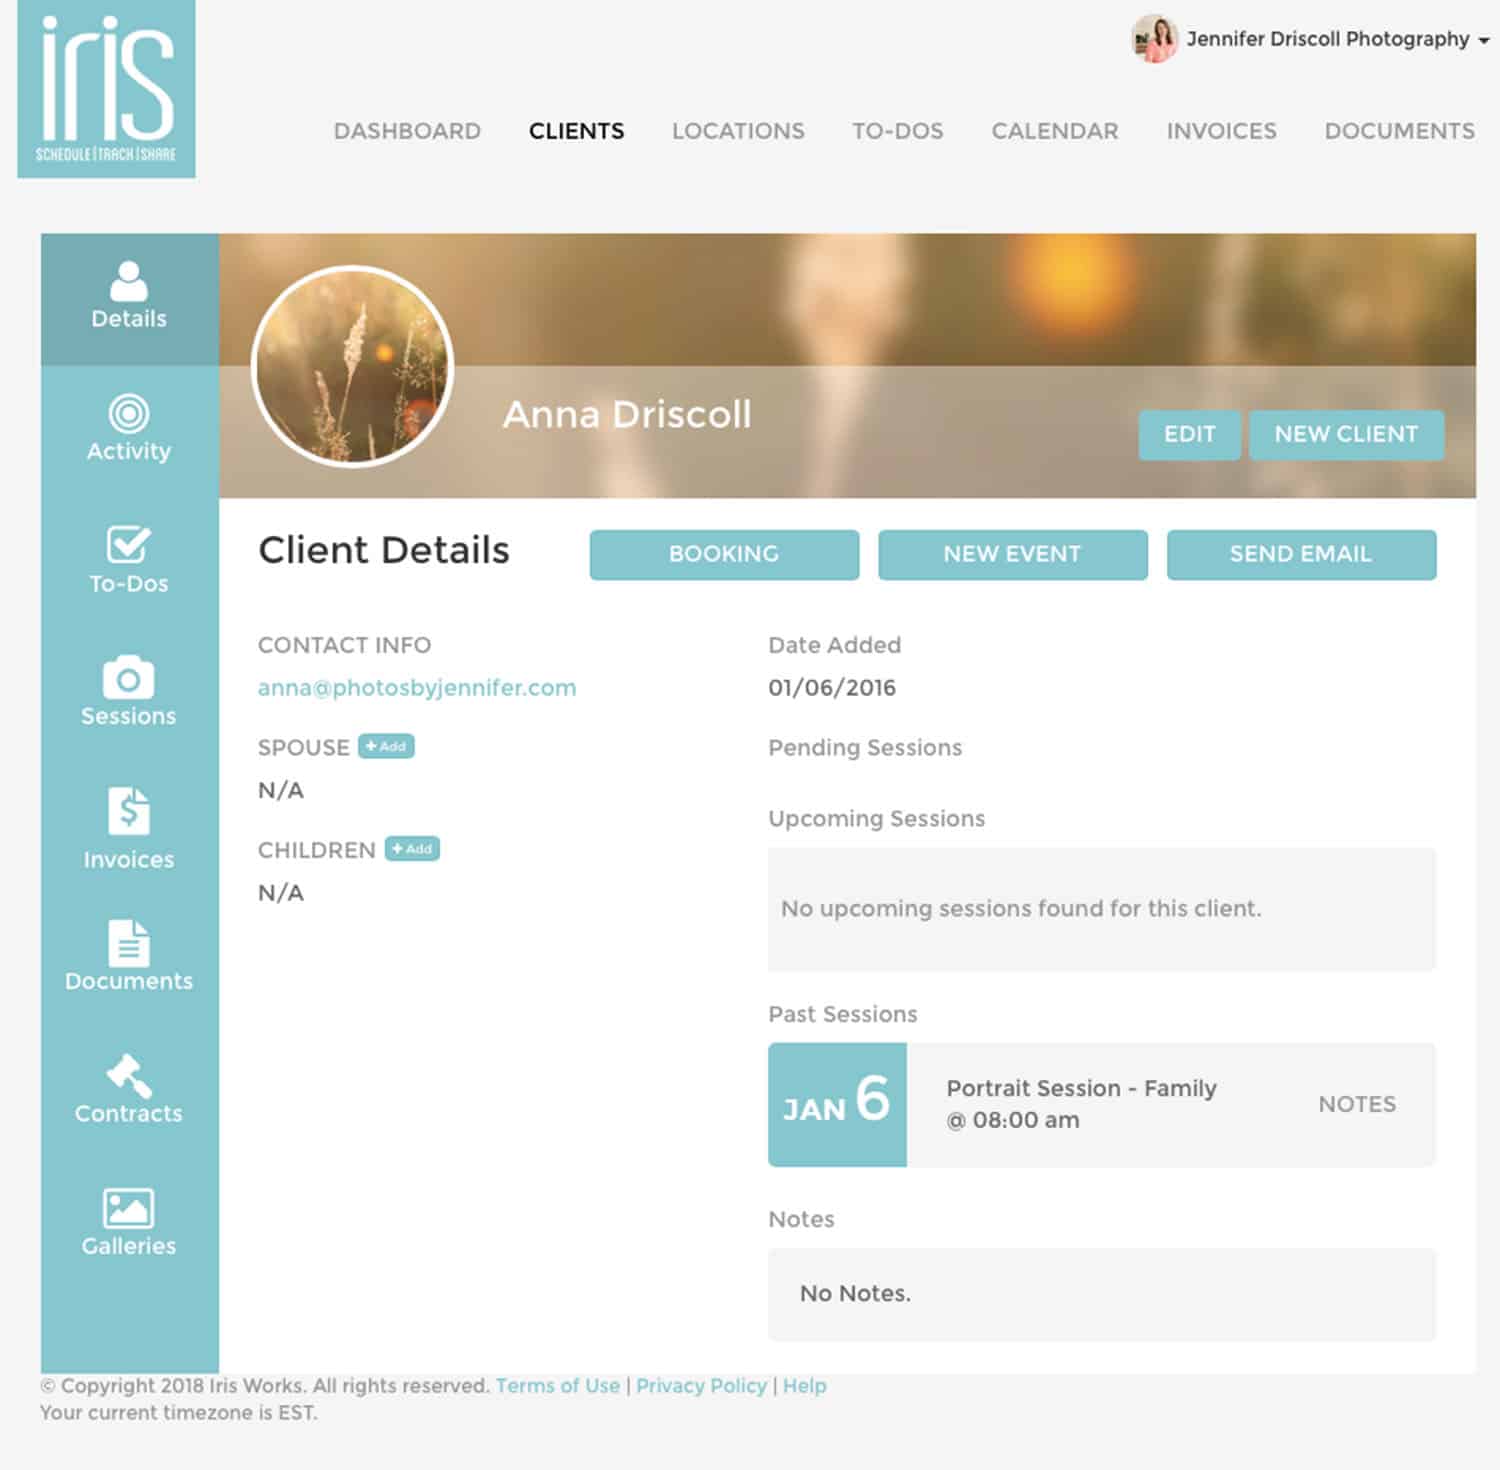 Book Clients Online with Iris Works studio management software!